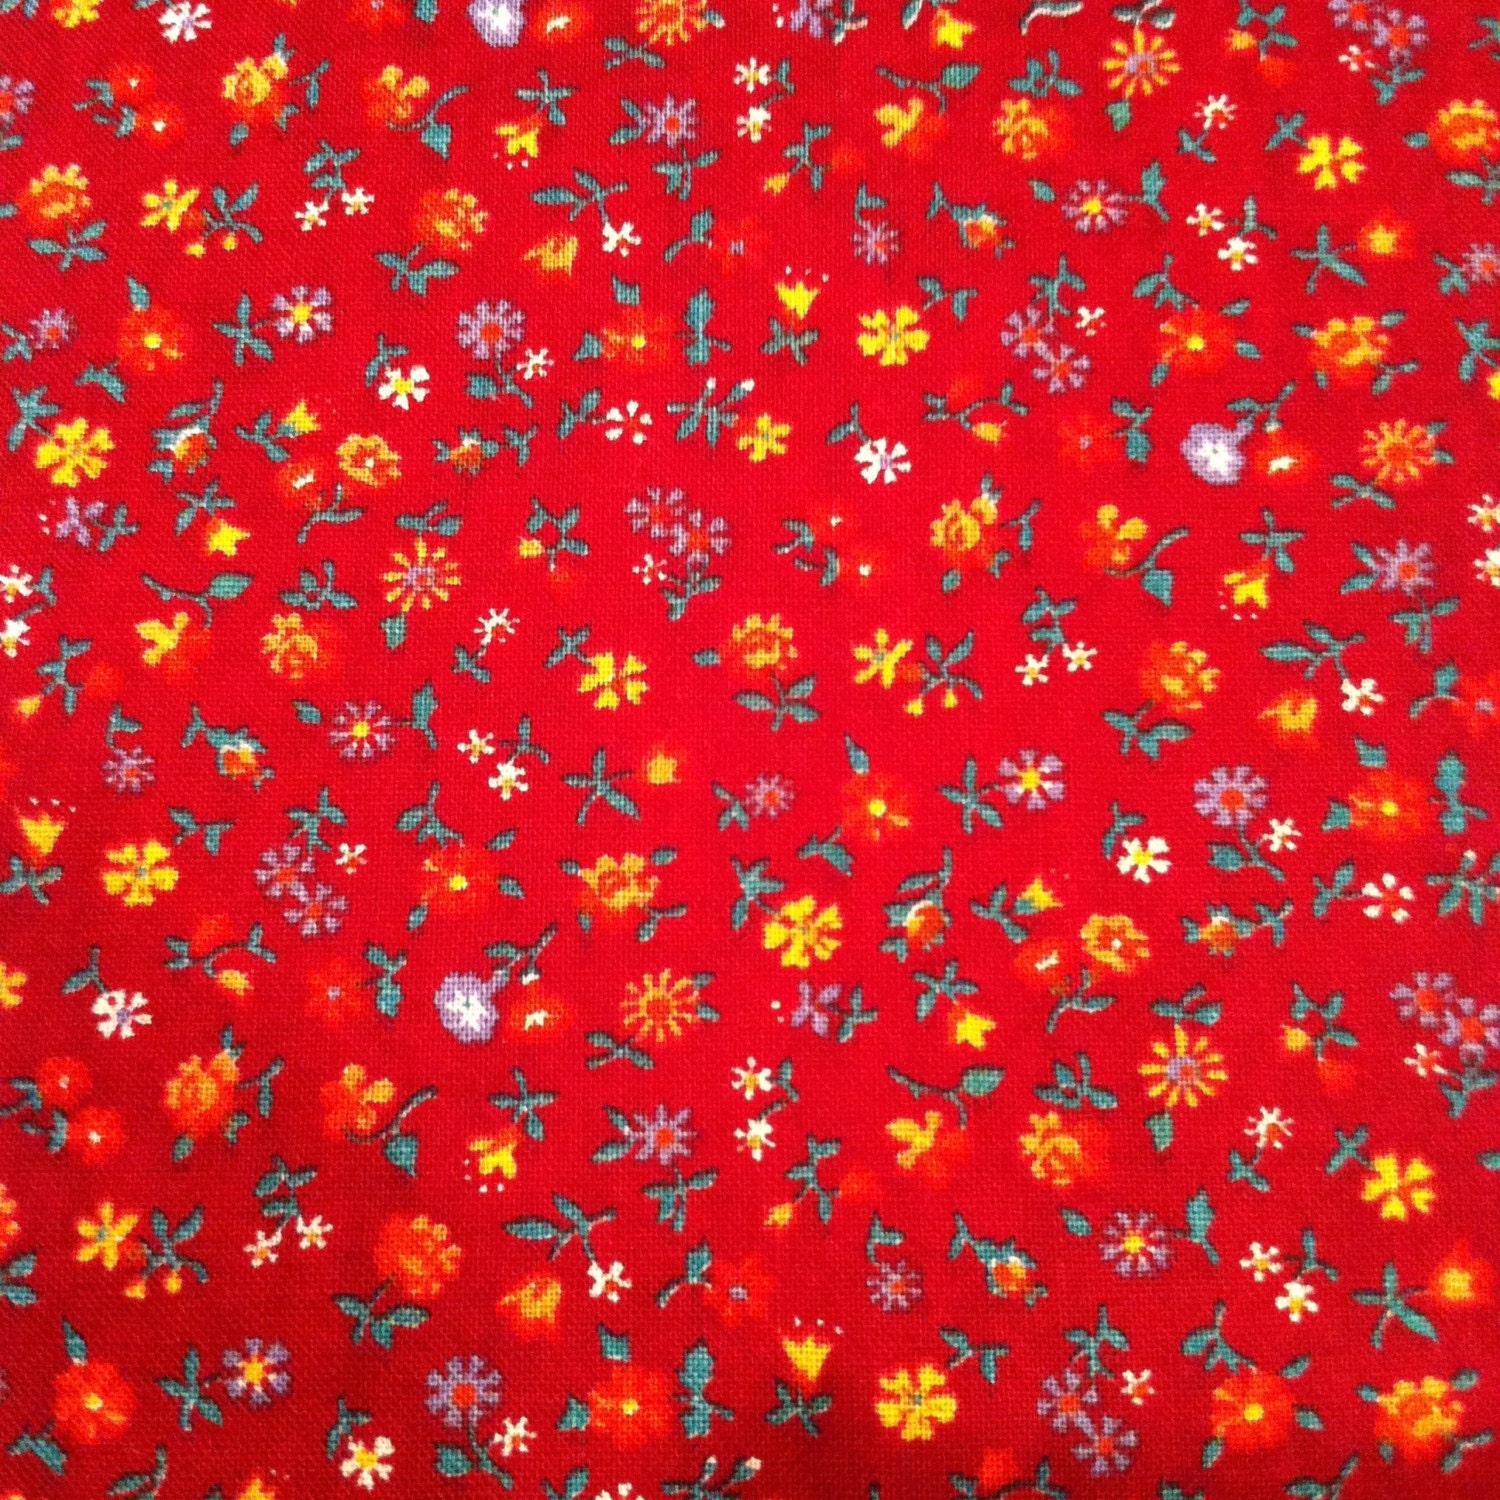 Bright Red Floral Print Fabric 1 Yard Red Yellow Floral